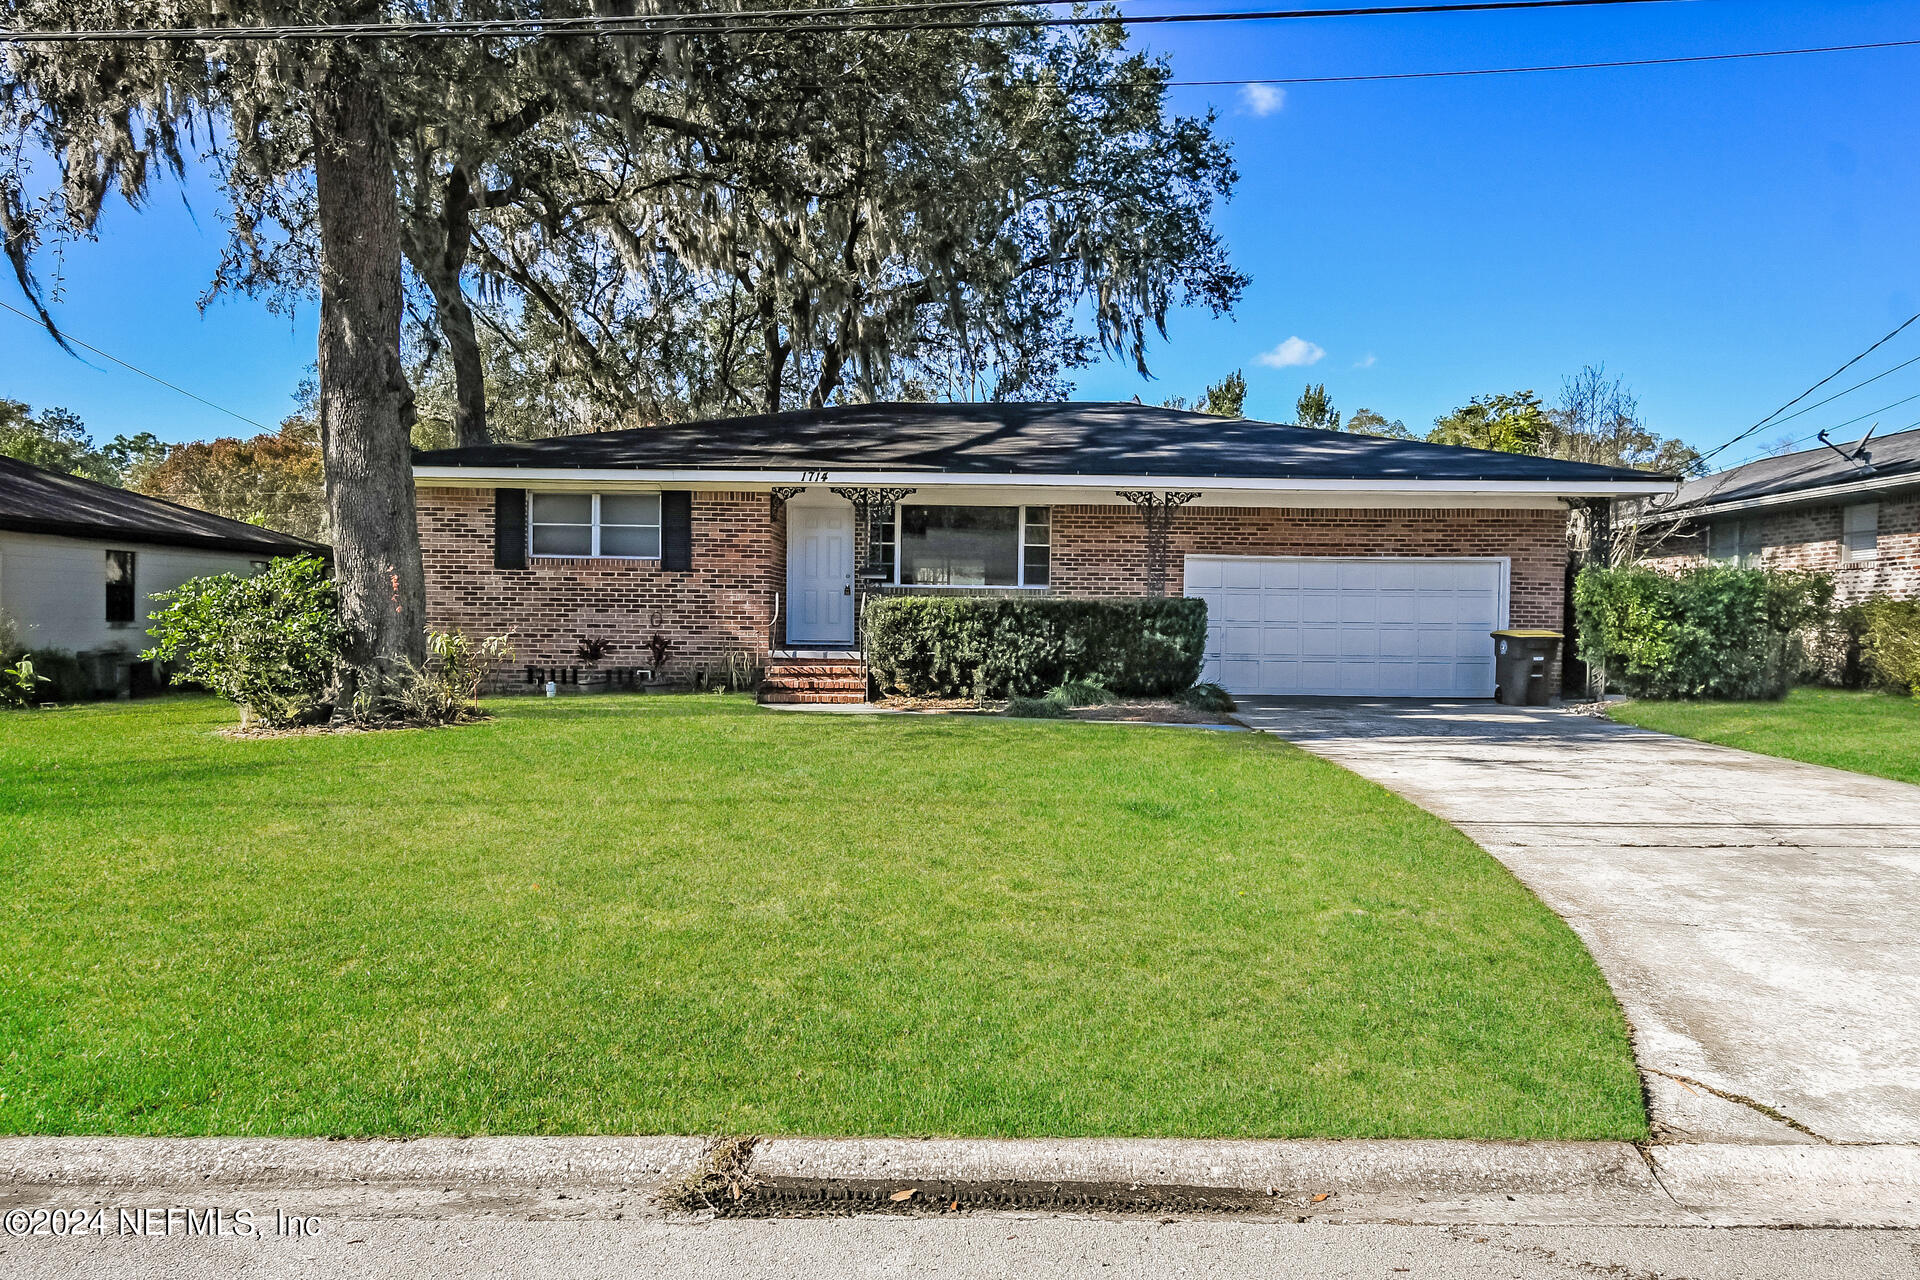 Jacksonville, FL home for sale located at 1714 Westminister Avenue, Jacksonville, FL 32210